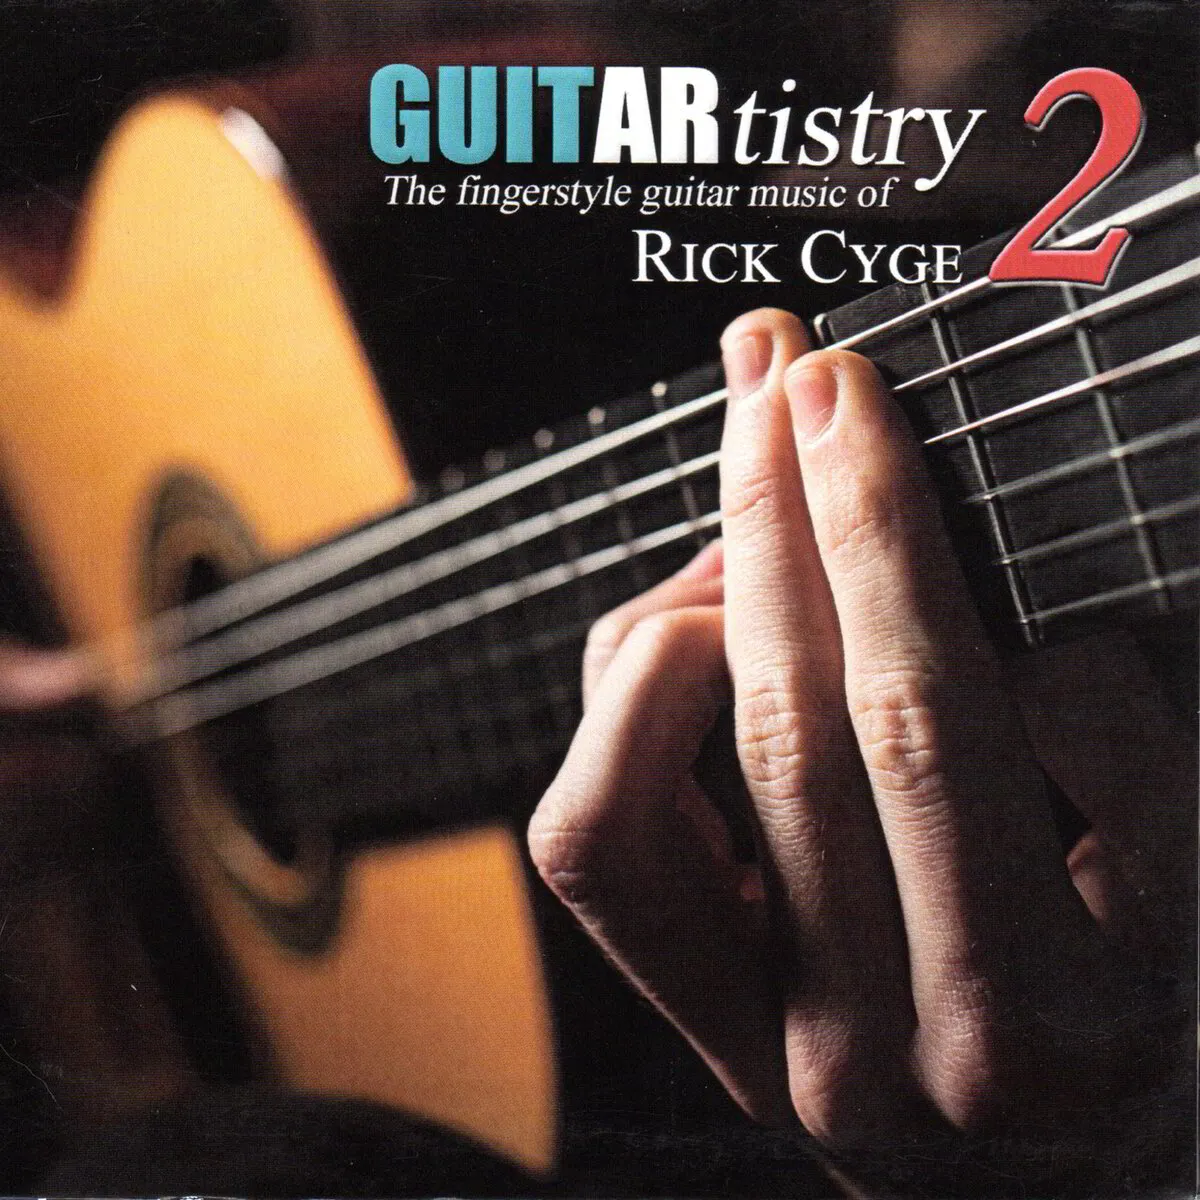 MEMBERS ONLY DEAL on GUITARtistry 2 Download!